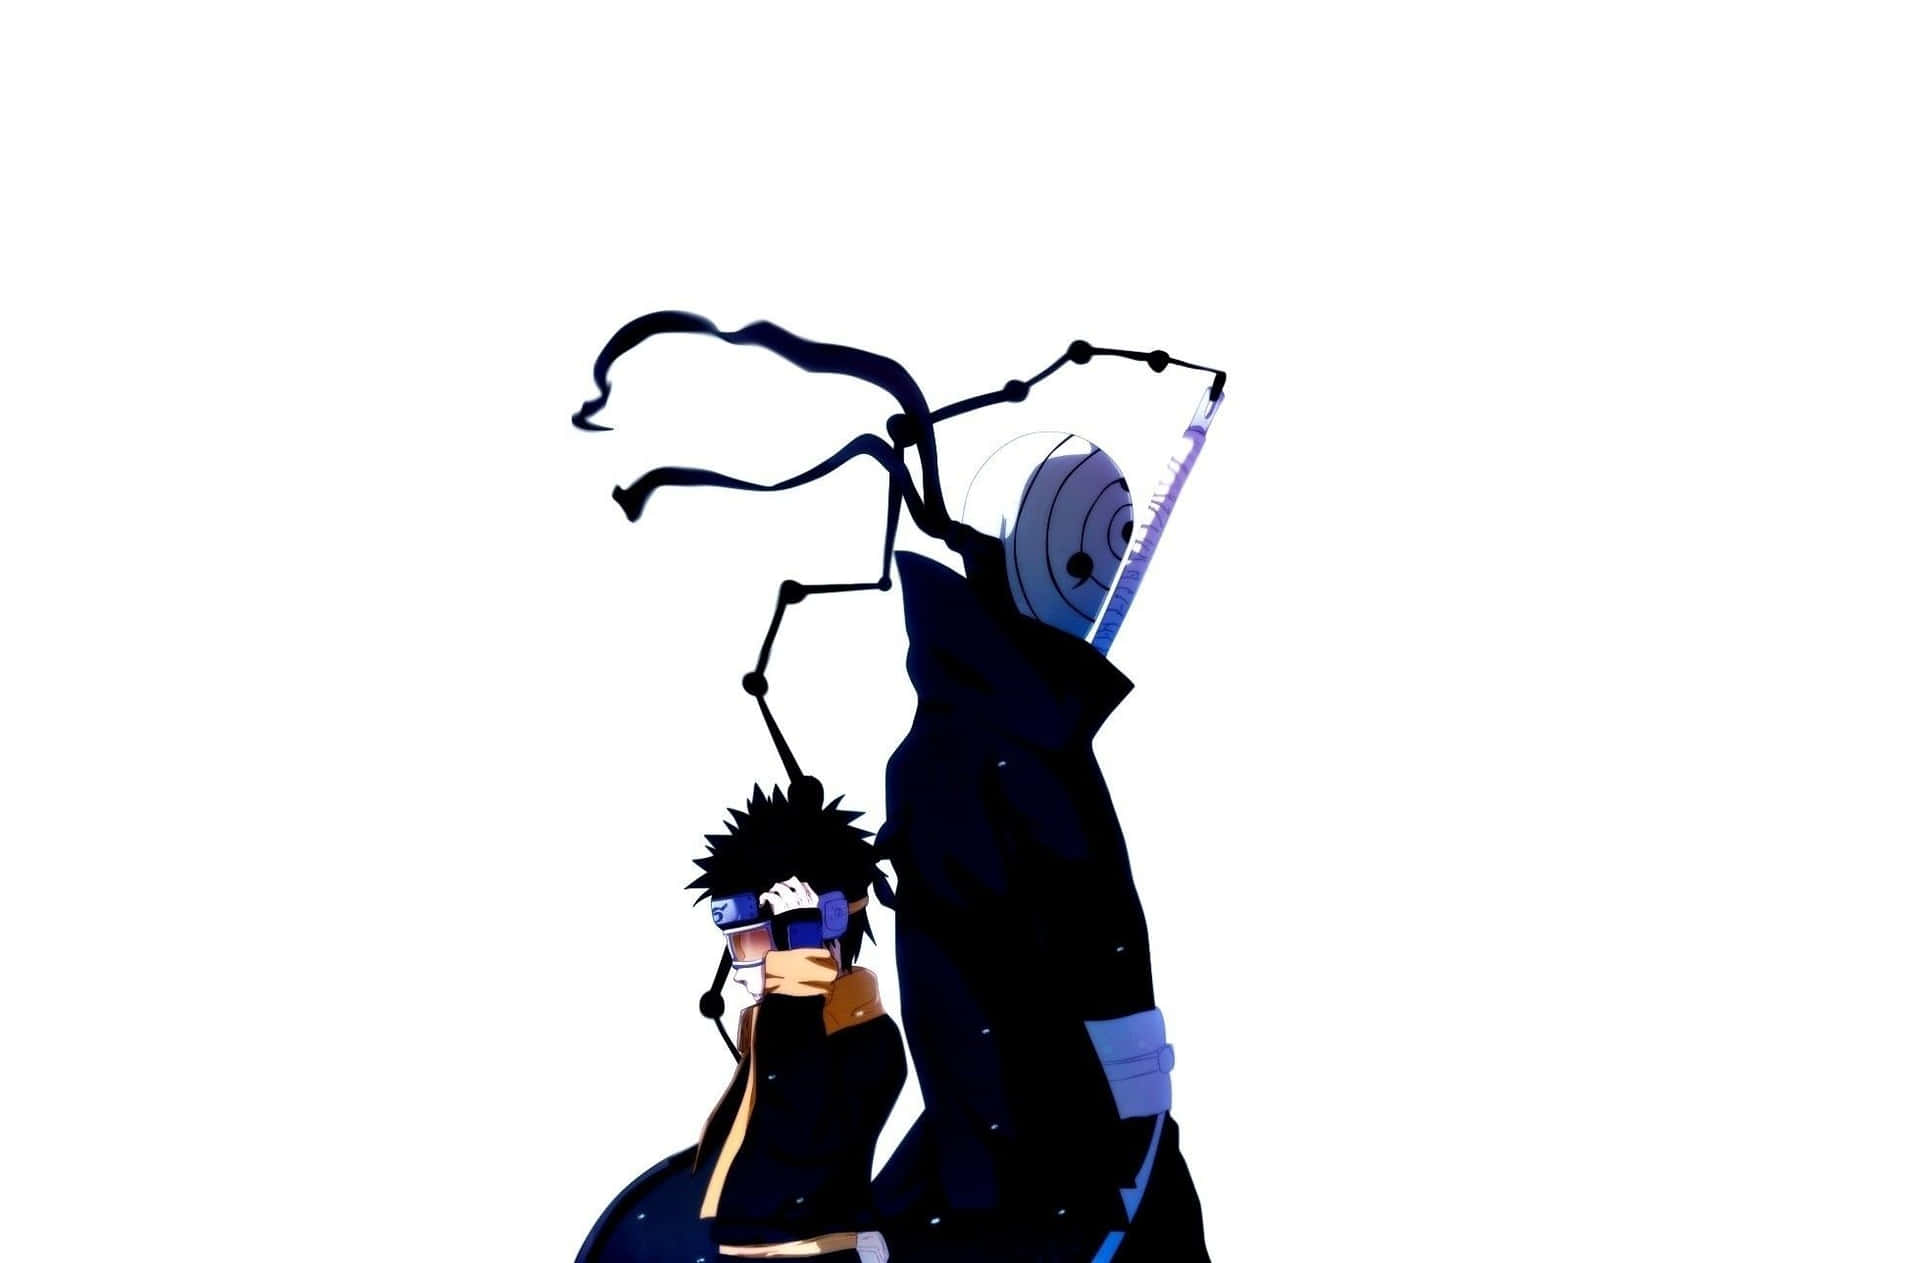 Intriguing White-themed Naruto Wallpaper